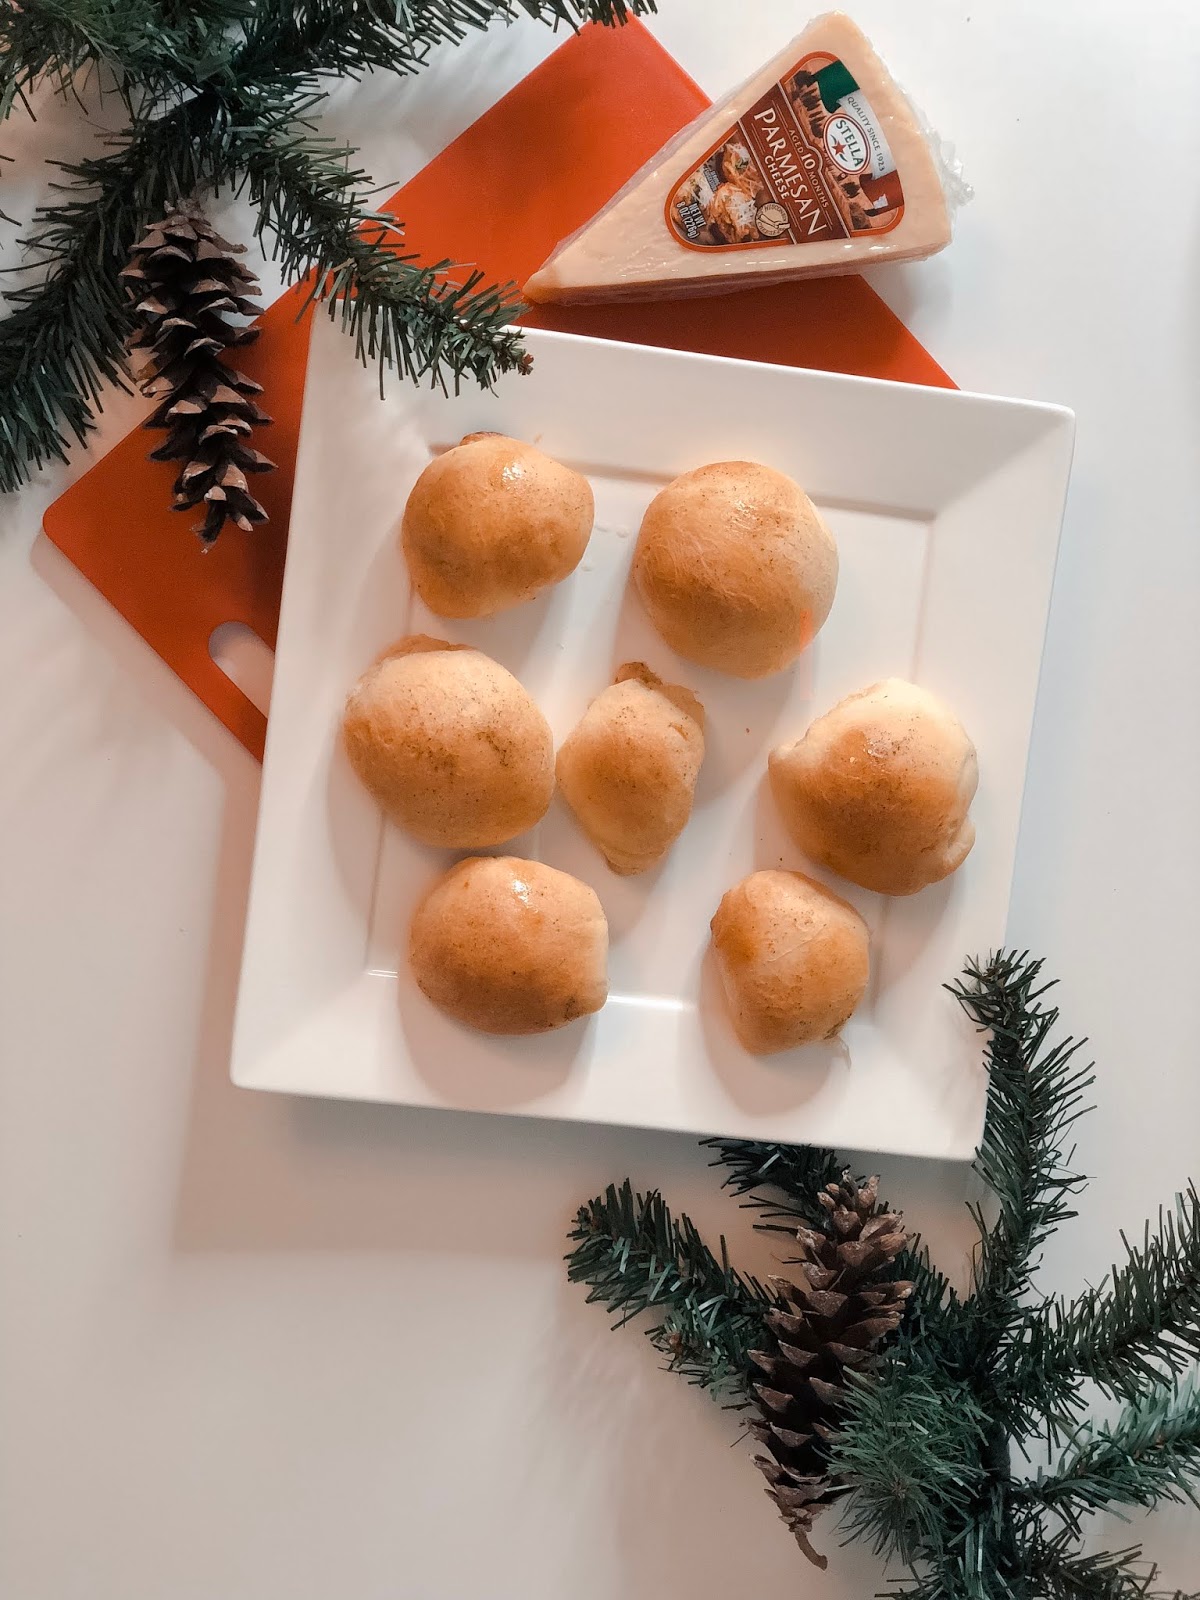 stella cheese, parmesan cheese, holiday food, easy recipes, appetizers, parmesan cresent balls